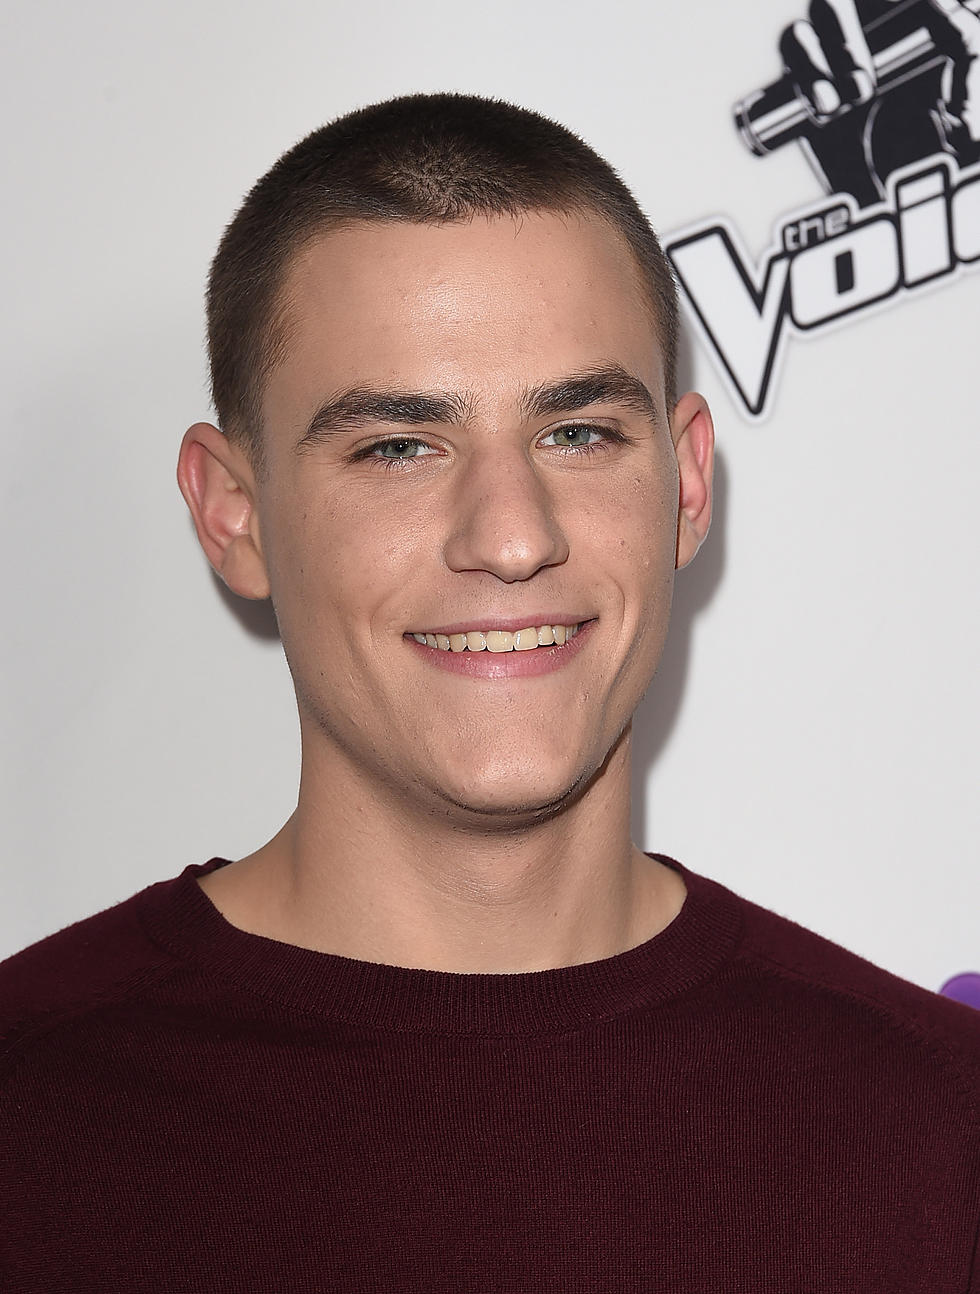 Cover Song Friday – ‘The Voice’ Alum Chris Jamison Covers ‘Want To Want Me’